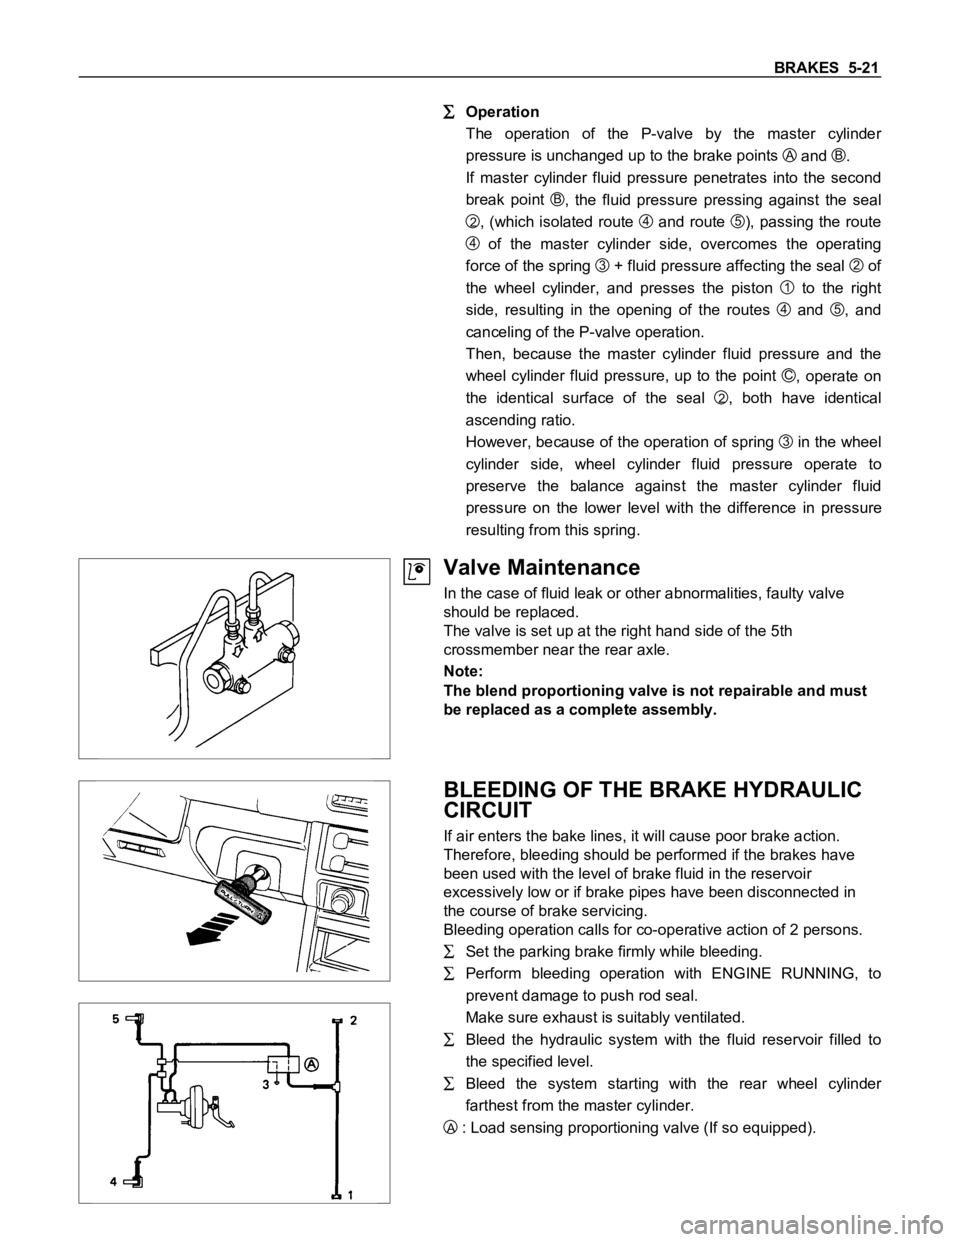 ISUZU TFS SERIES 1997  Workshop Manual BRAKES  5-21
Operation
The  operation  of  the  P-valve  by  the  master  cylinder
pressure is unchanged up to the brake points 
A and B.
If  master  cylinder  fluid  pressure  penetrates  into  the  